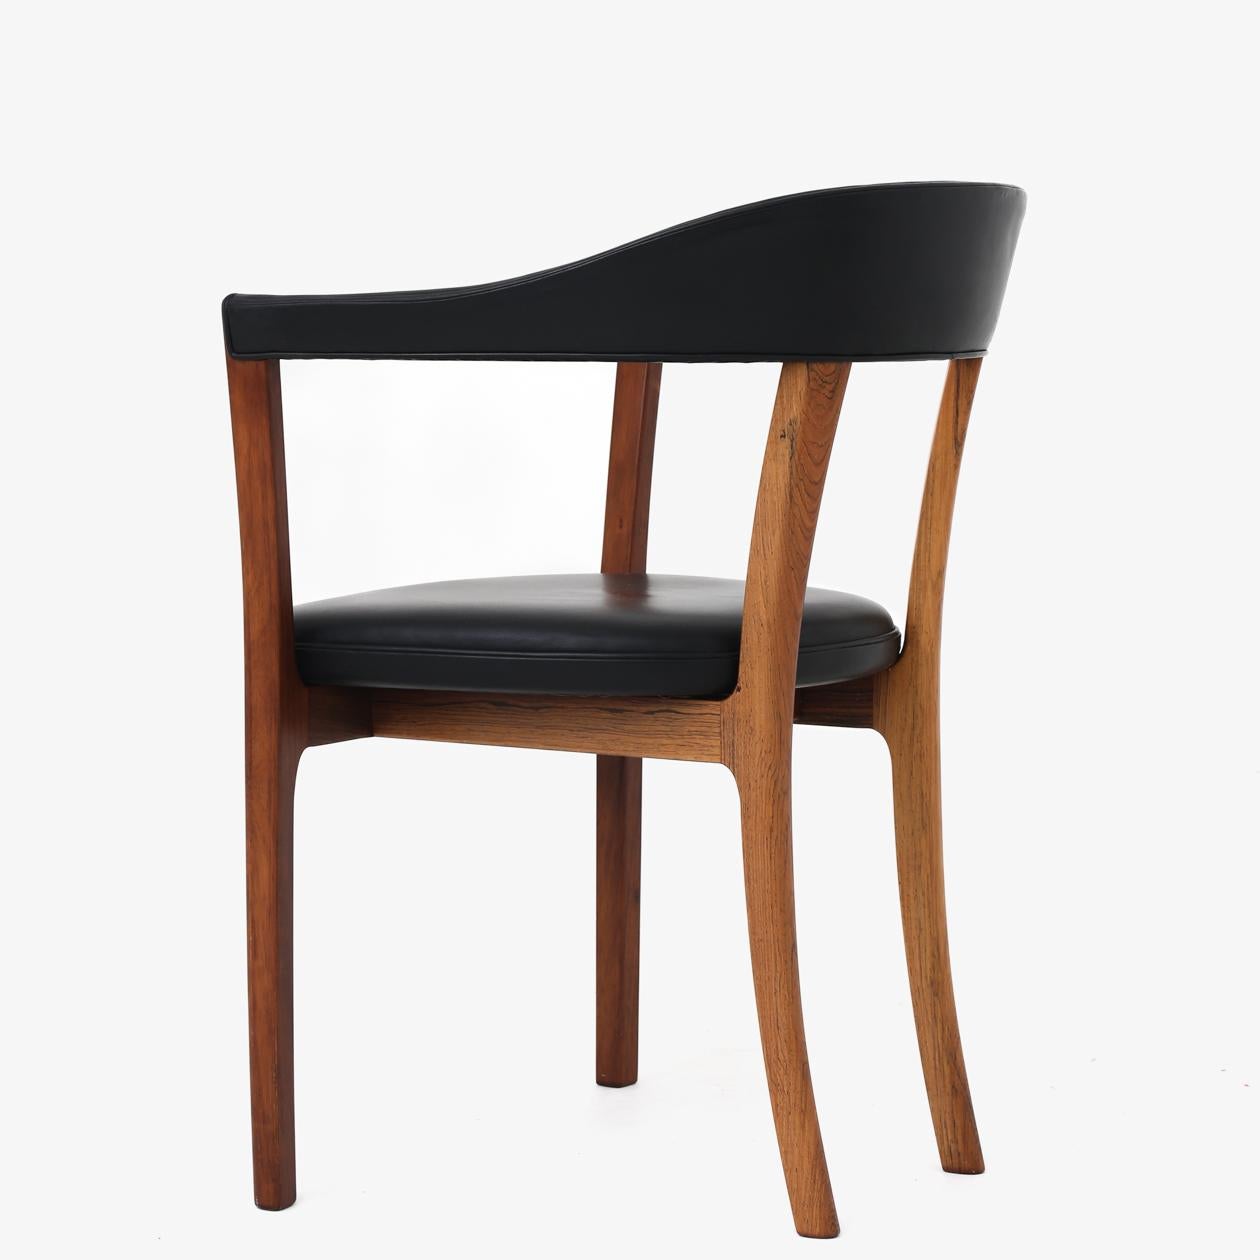 Armchair in rosewood and black leather. Ole Wanscher / A.J Iversen.